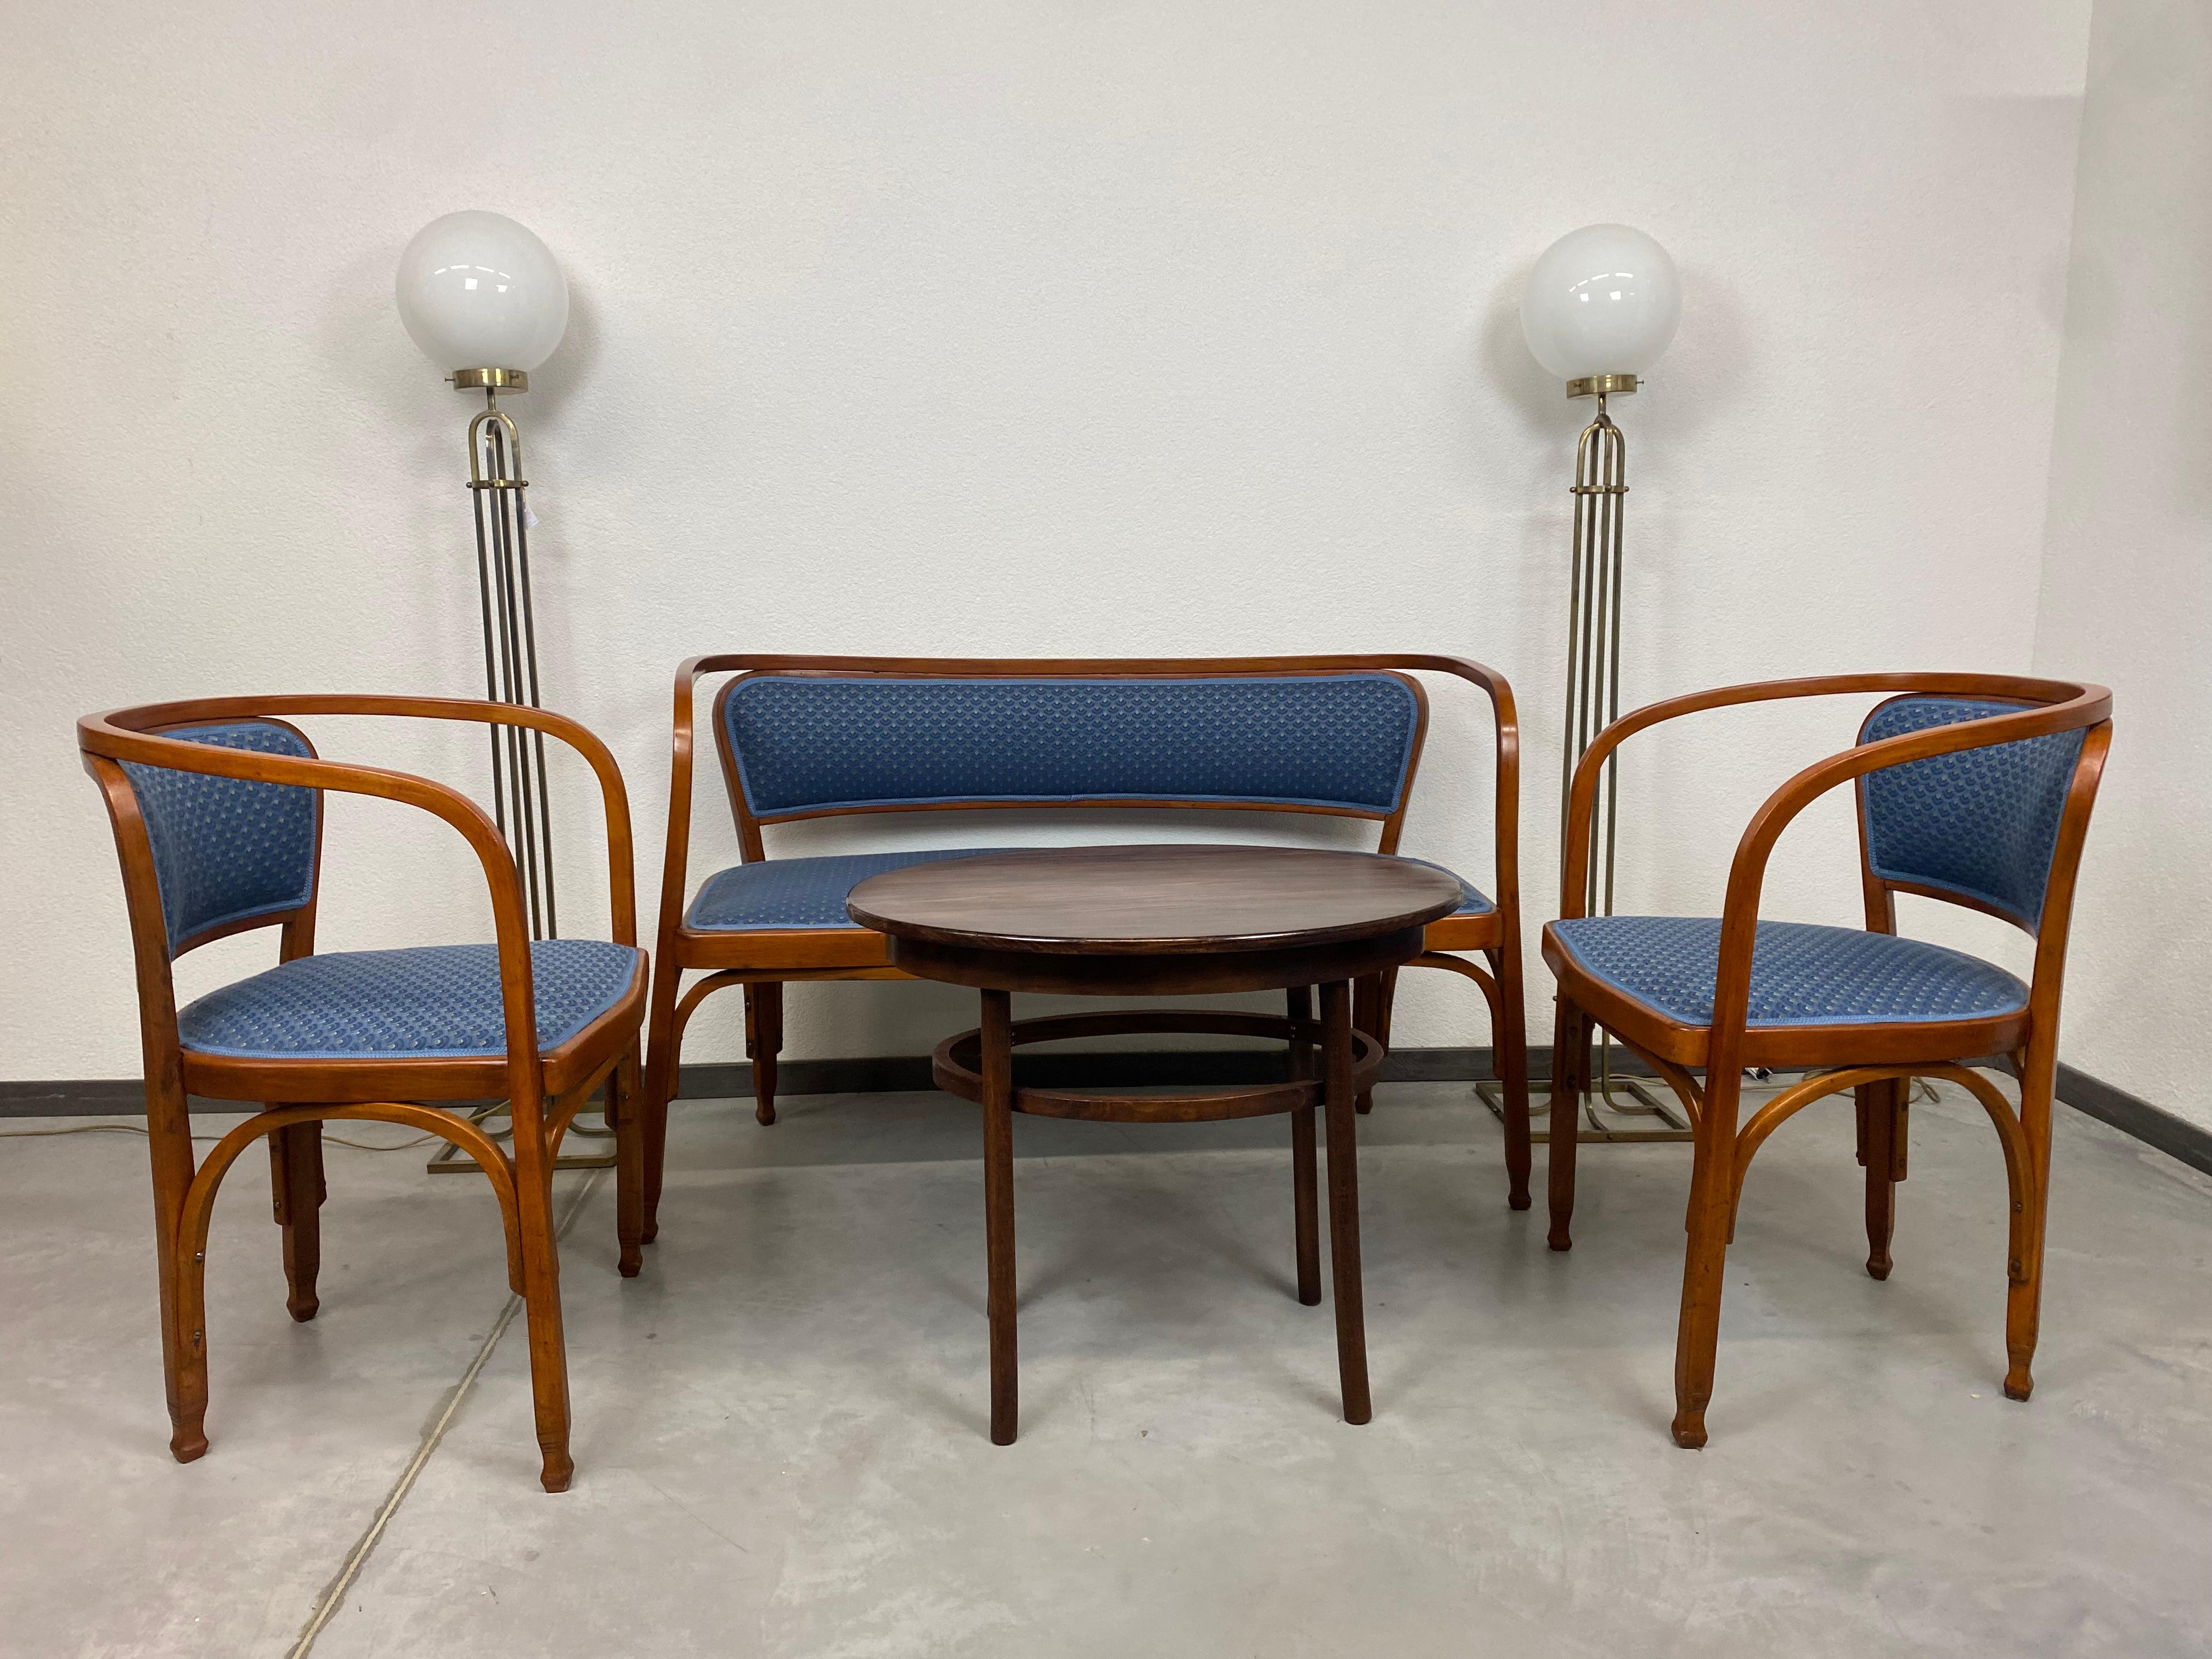 Secession seating group no.715 by Gustav Siegel for J&J Kohn. Originaly designed in 1899 for world exhibition in Paris in 1900.